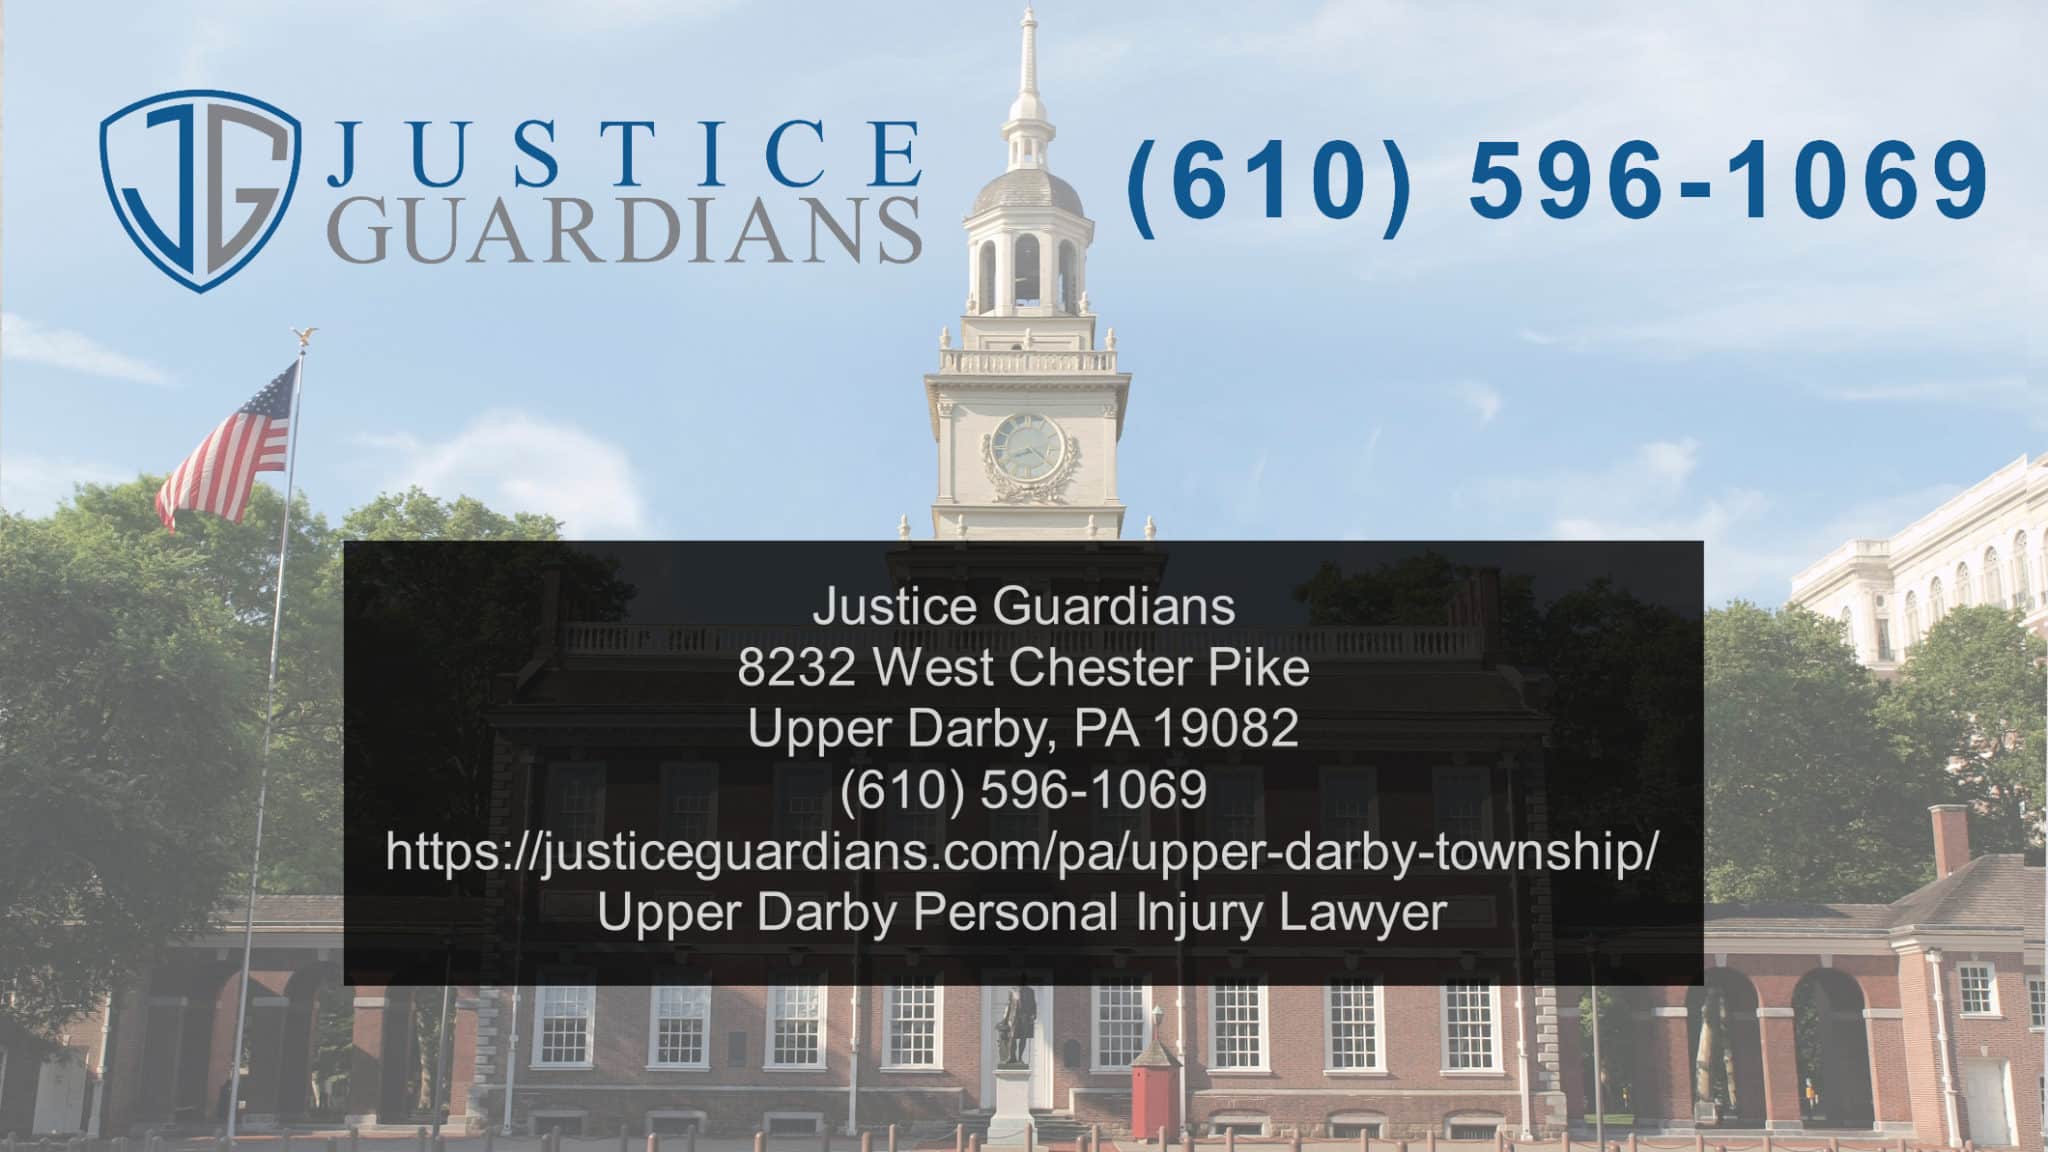 Personal-Injury-Lawyer-Near-Me-Upper-Darby-Justice-Guardians-scaled-1.jpeg